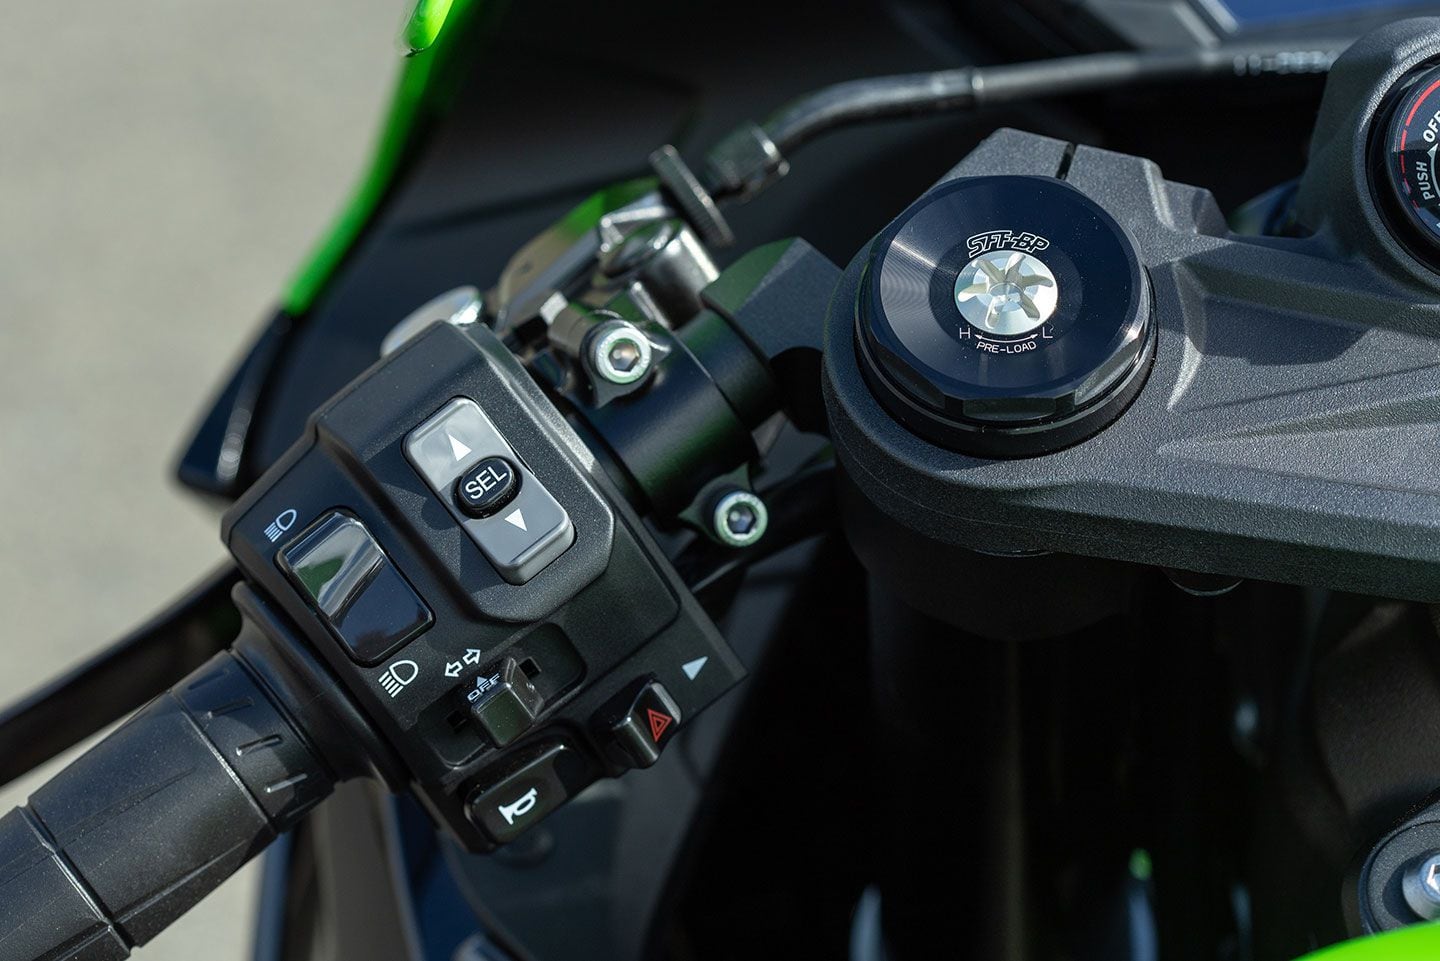 The 2024 ZX-6R uses the same switch cluster as before. An extended press down or up changes ride modes. Quick presses are for scrolling through information screens. It’s a simple but effective system.